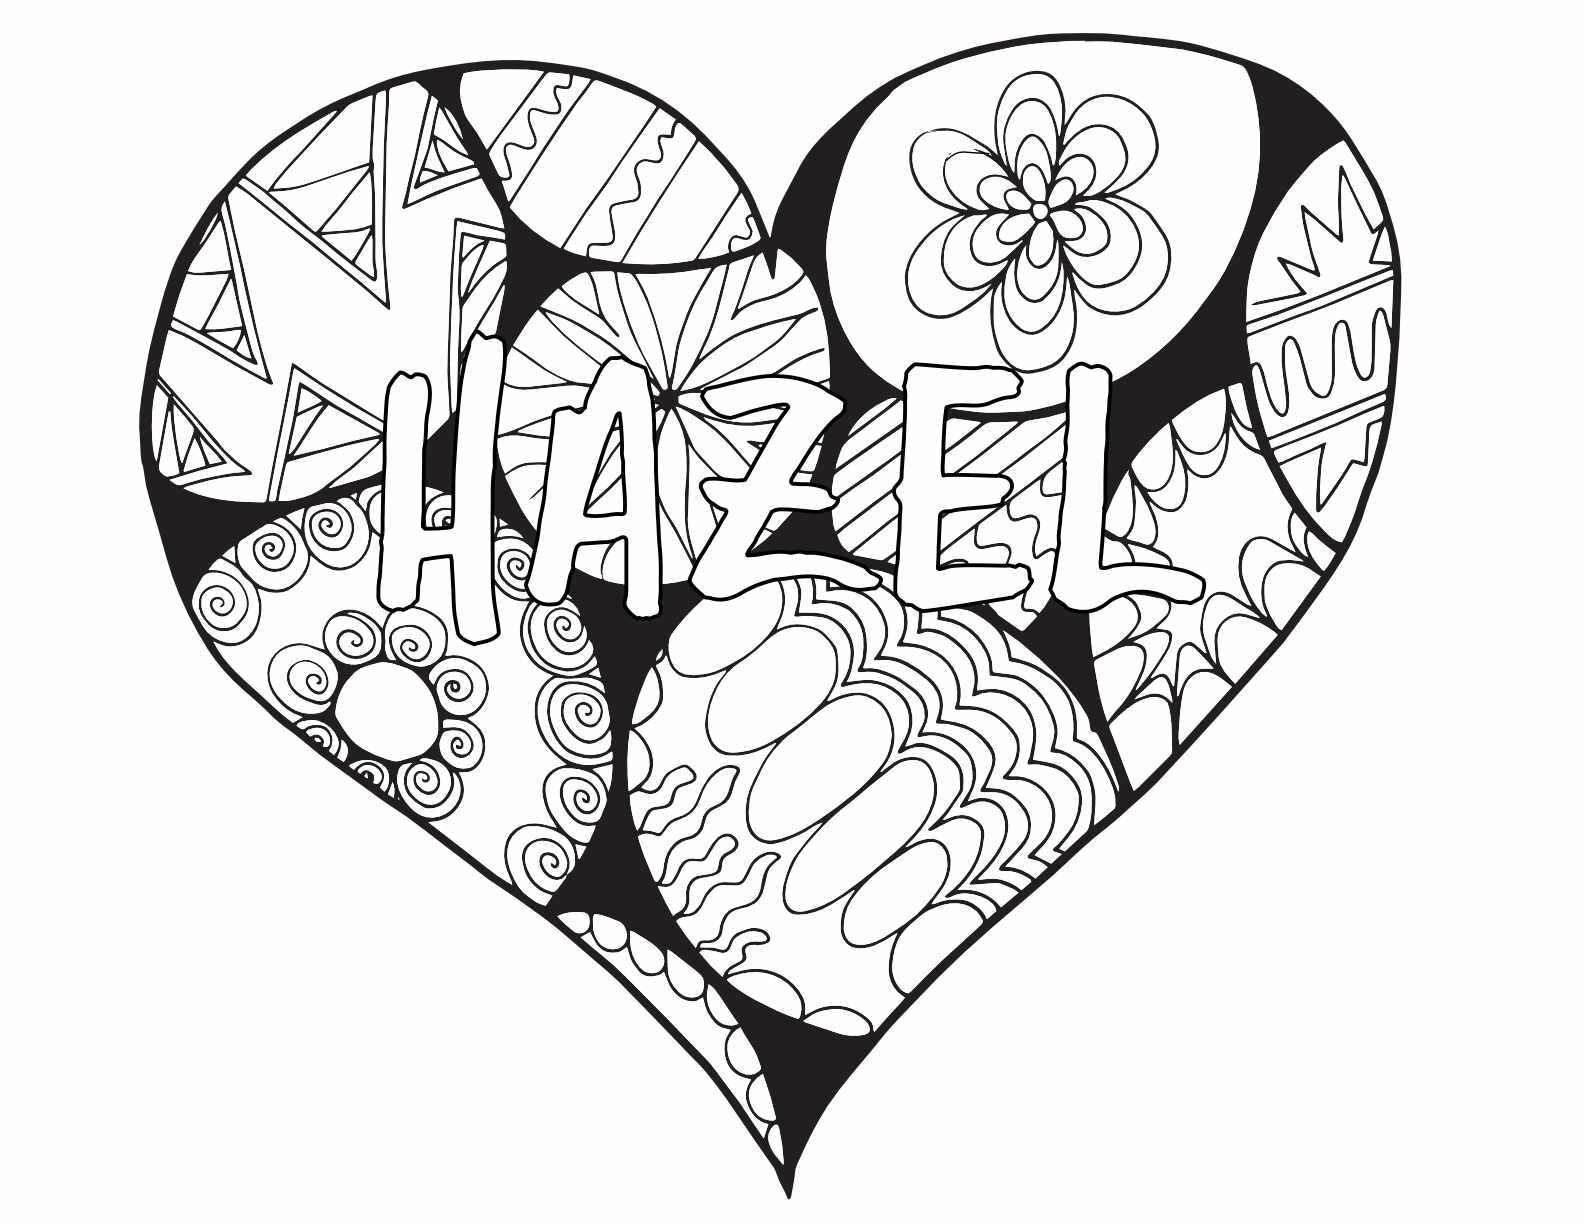 10 Free Printable HAZEL Coloring Pages!CLICK HERE TO DOWNLOAD THE COLORING PAGE ABOVE